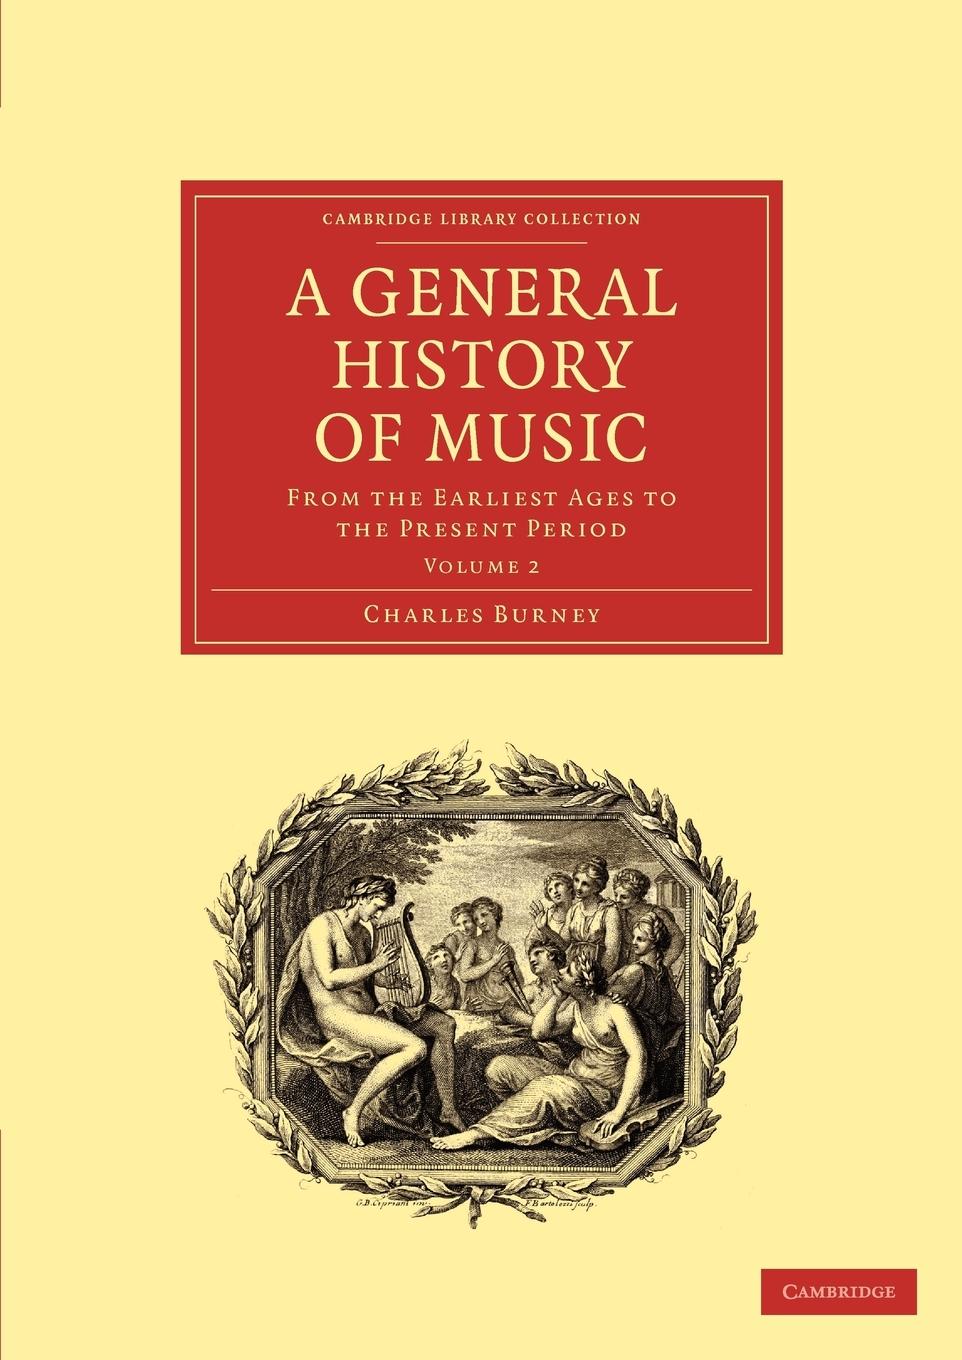 A General History of Music - Burney, Charles|Charles, Burney